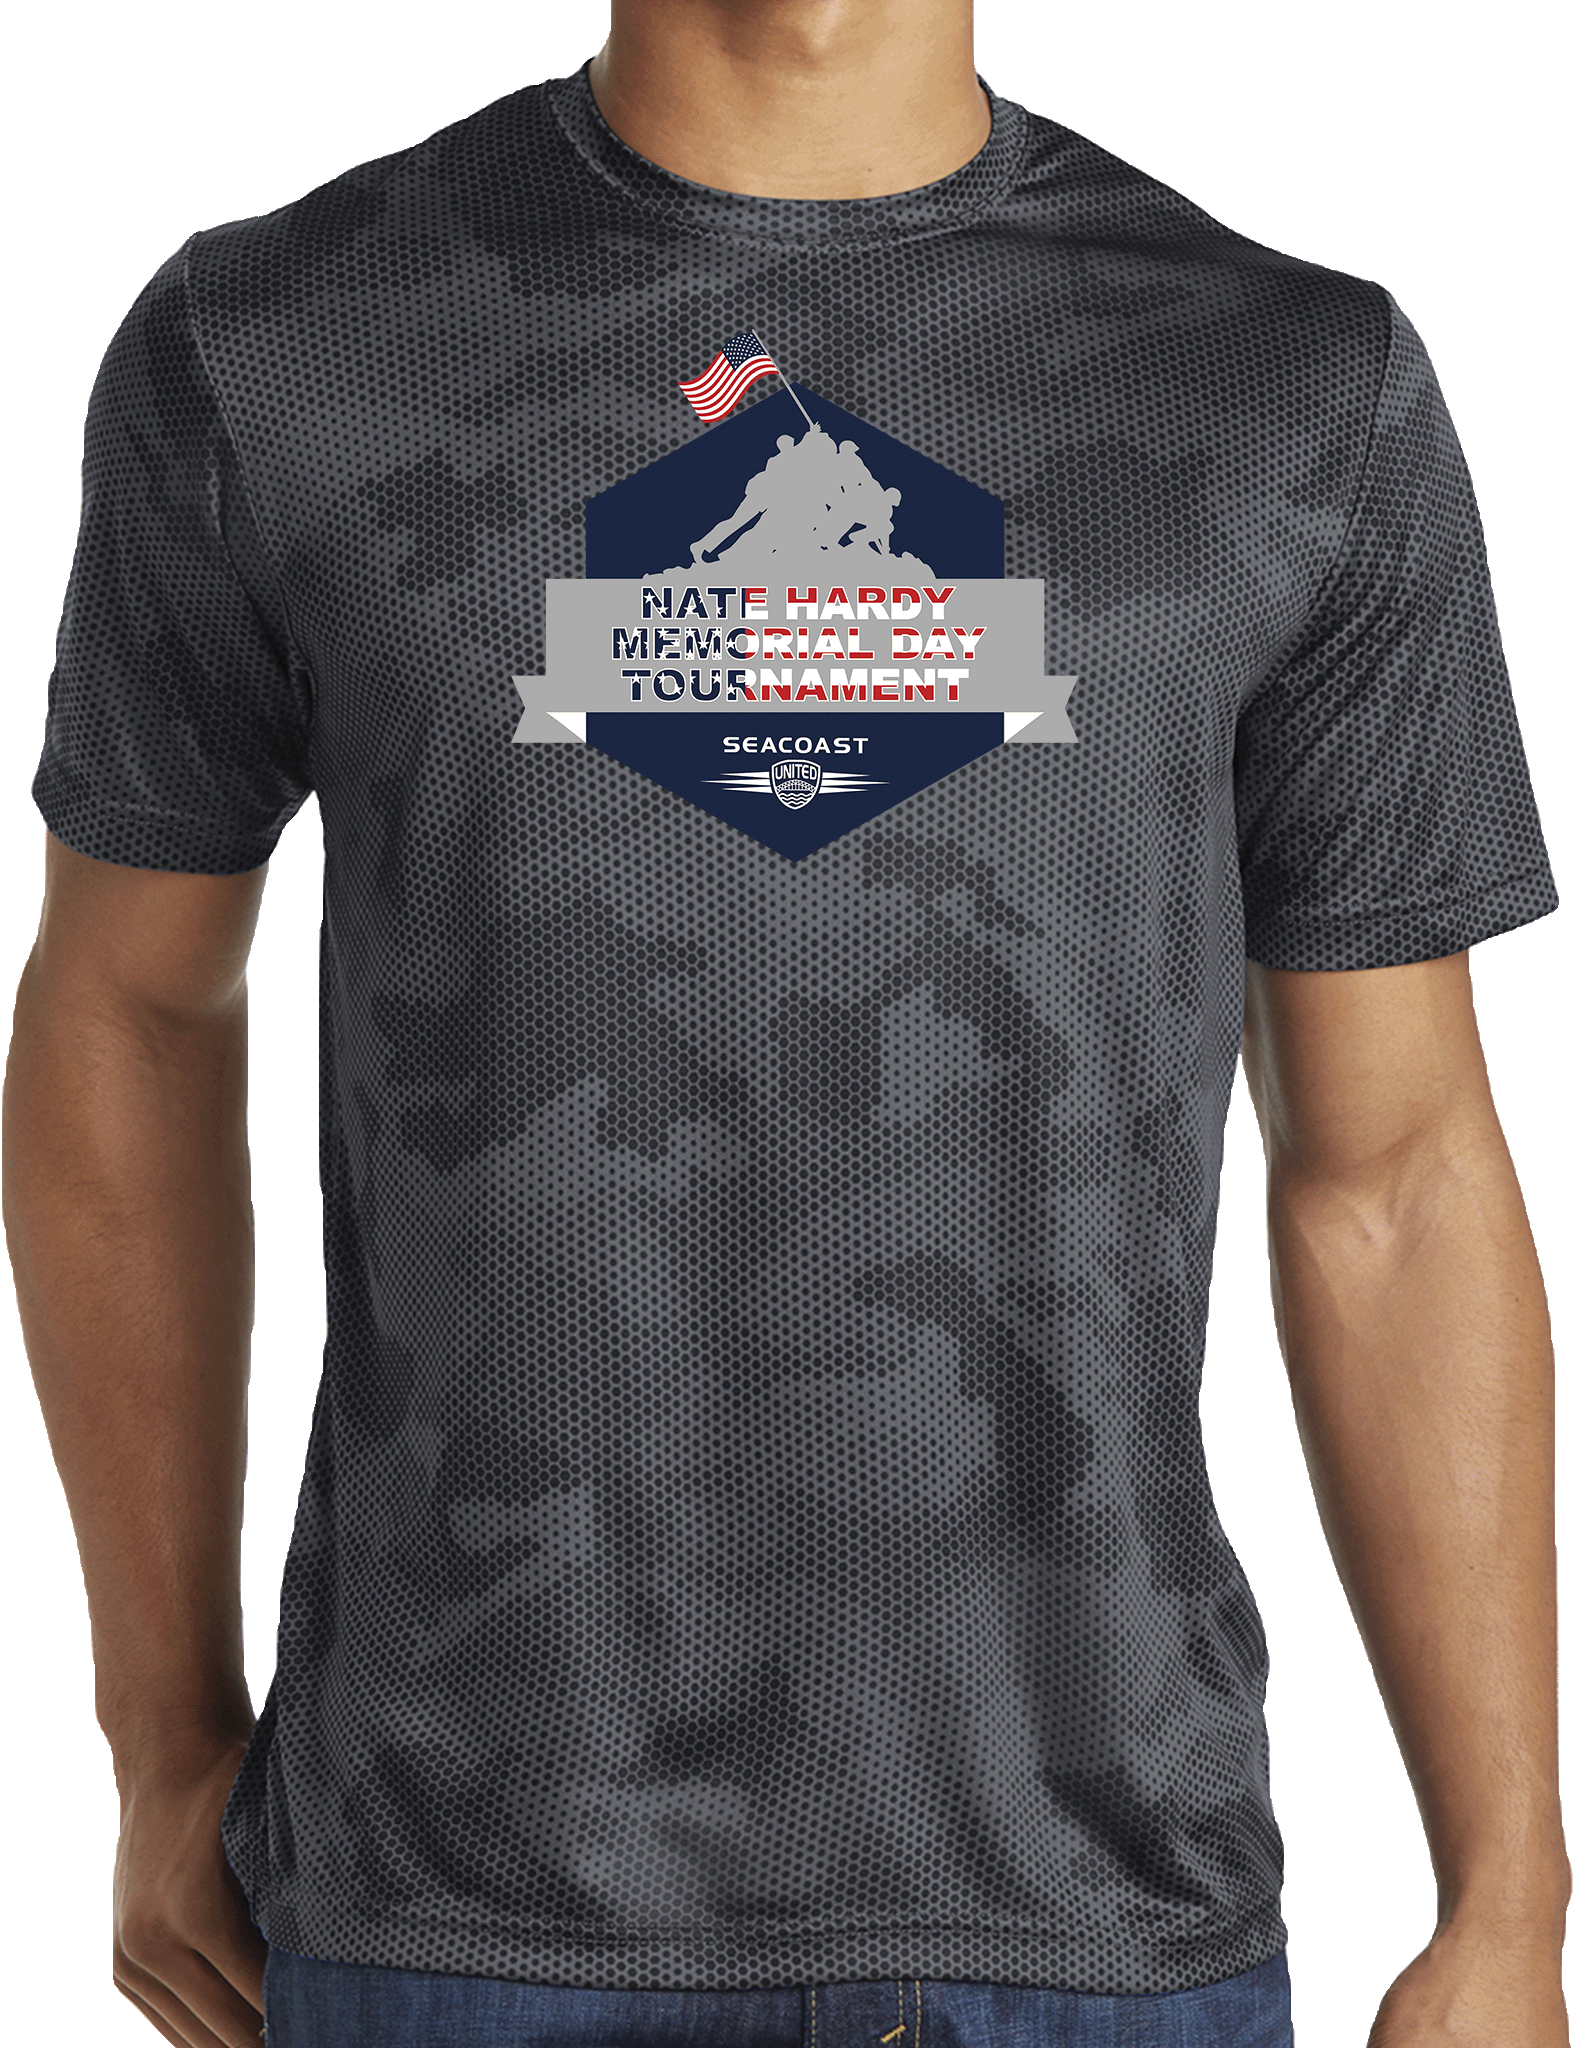 PERFORMANCE SHIRTS - 2023 Nate Hardy Memorial Day Tournament